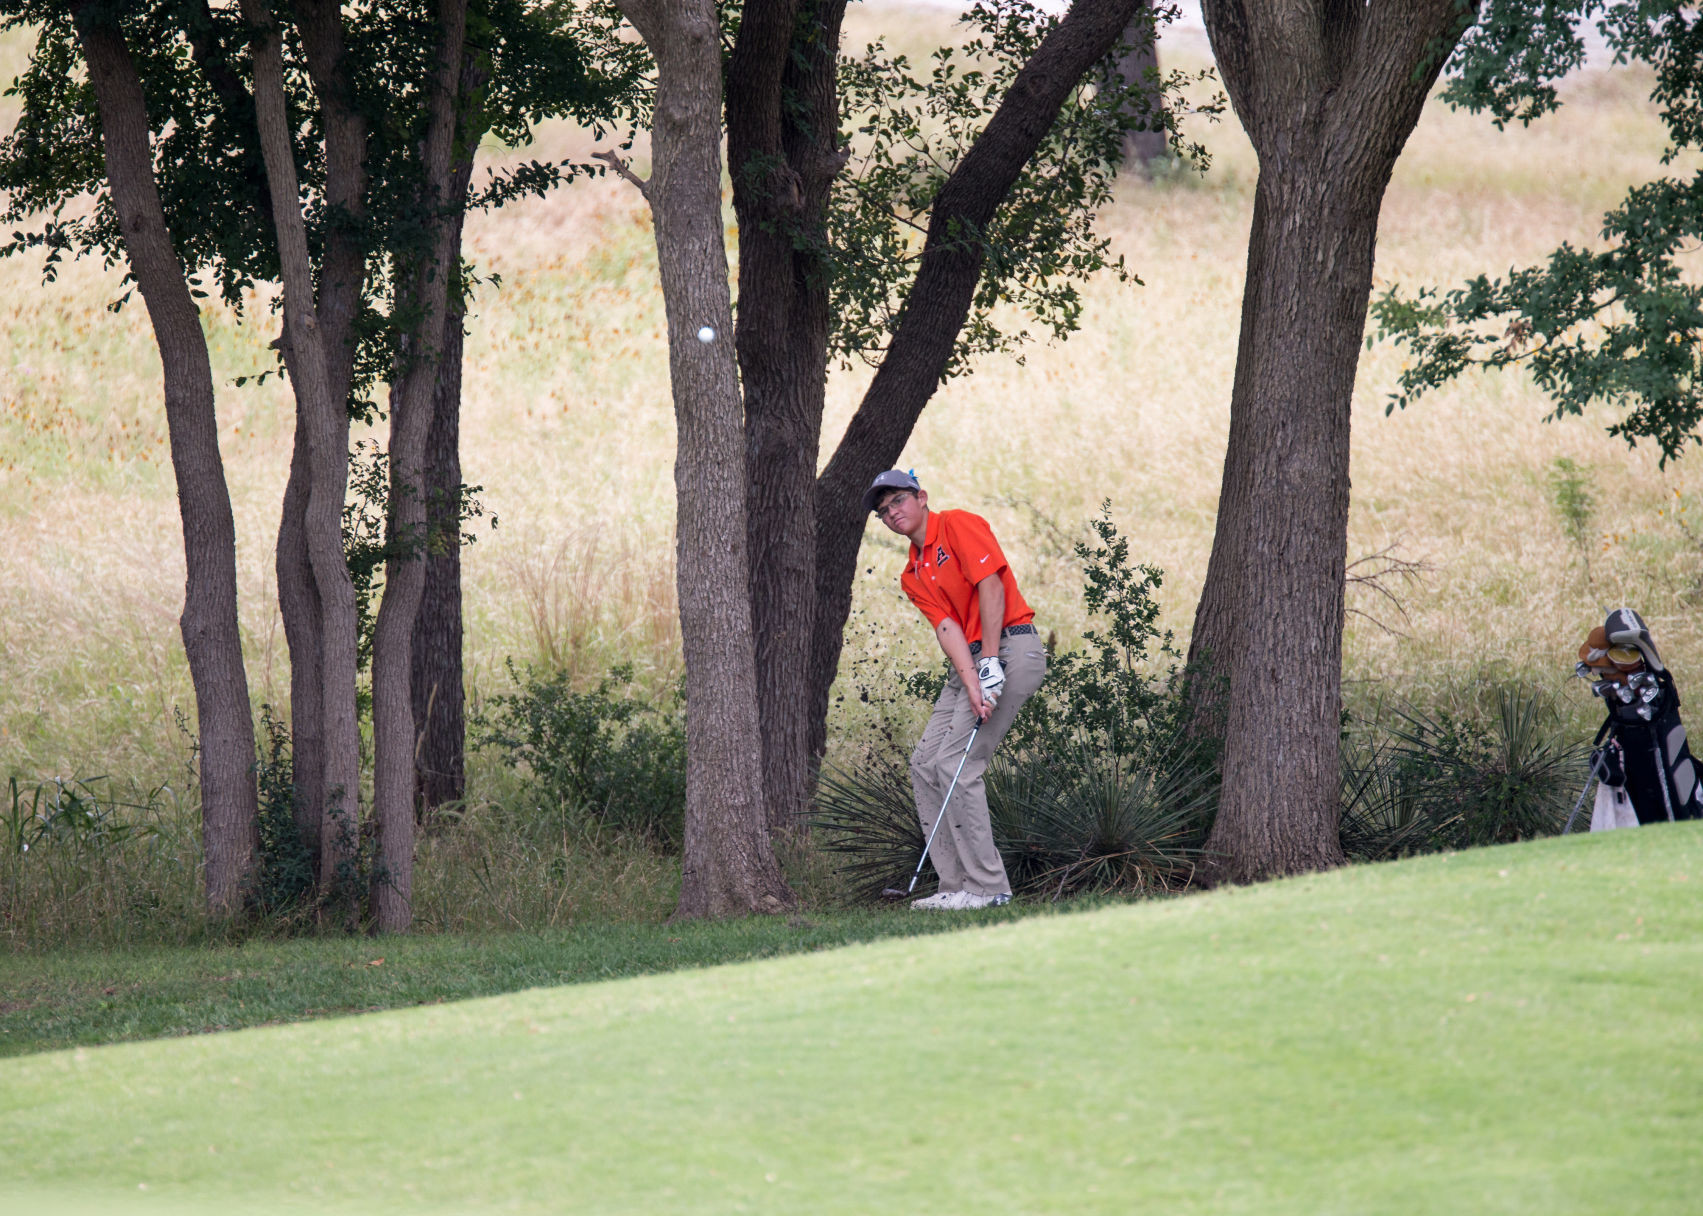 Gonzales High School's Mason Richter makes a shot from the rough during the opening round of the Class 4A boys state golf tournament at Apple Rock Golf Course in Horseshoe Bay, Texas, on Monday, May 22, 2017.